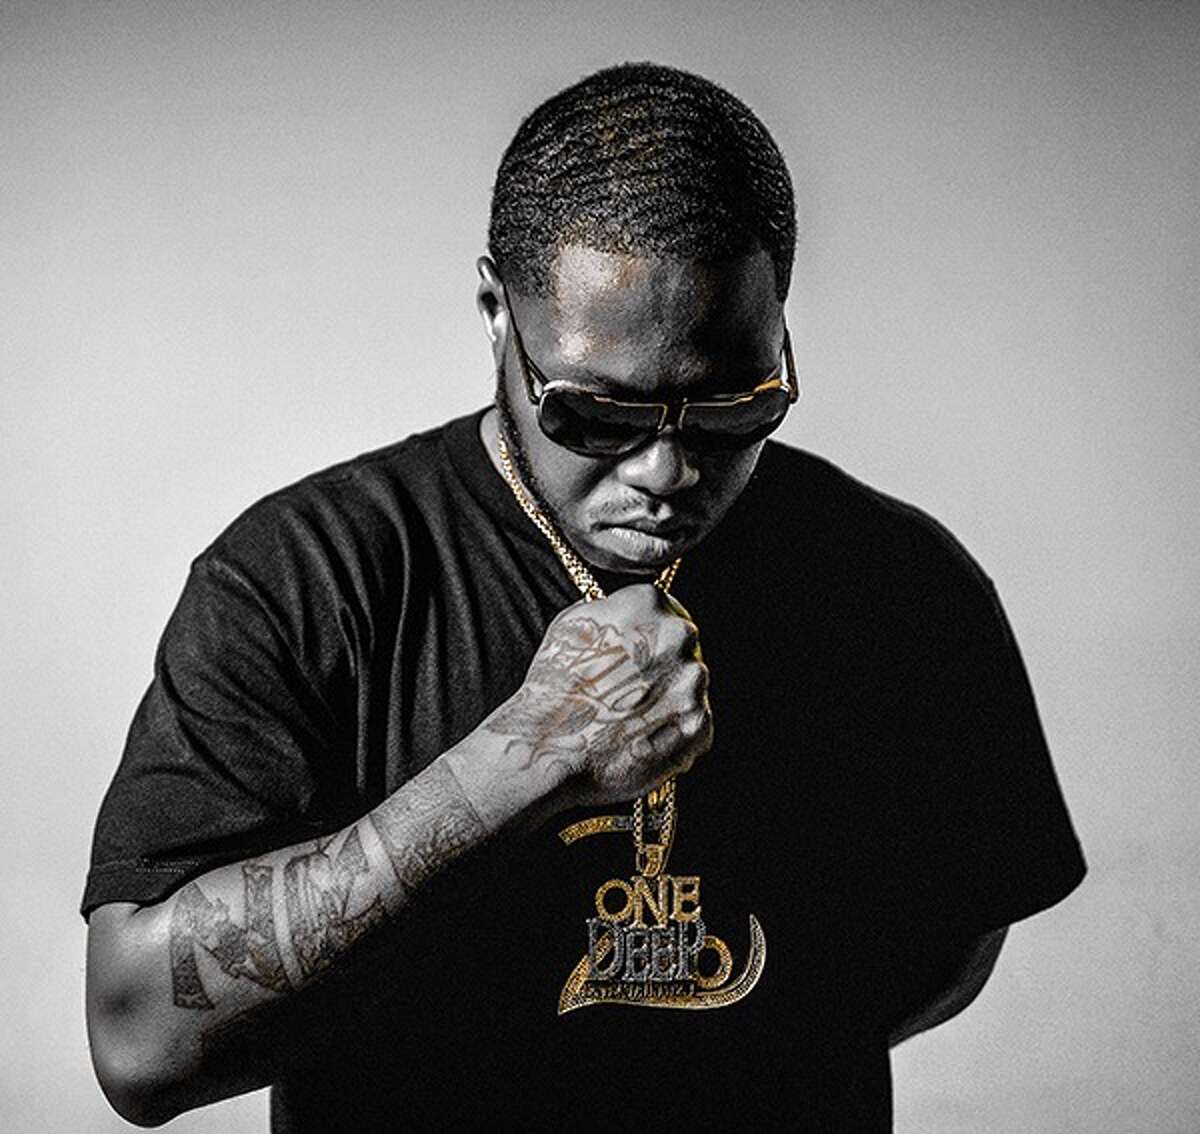 The brazenness and power of being the lone wolf, according to ZRo